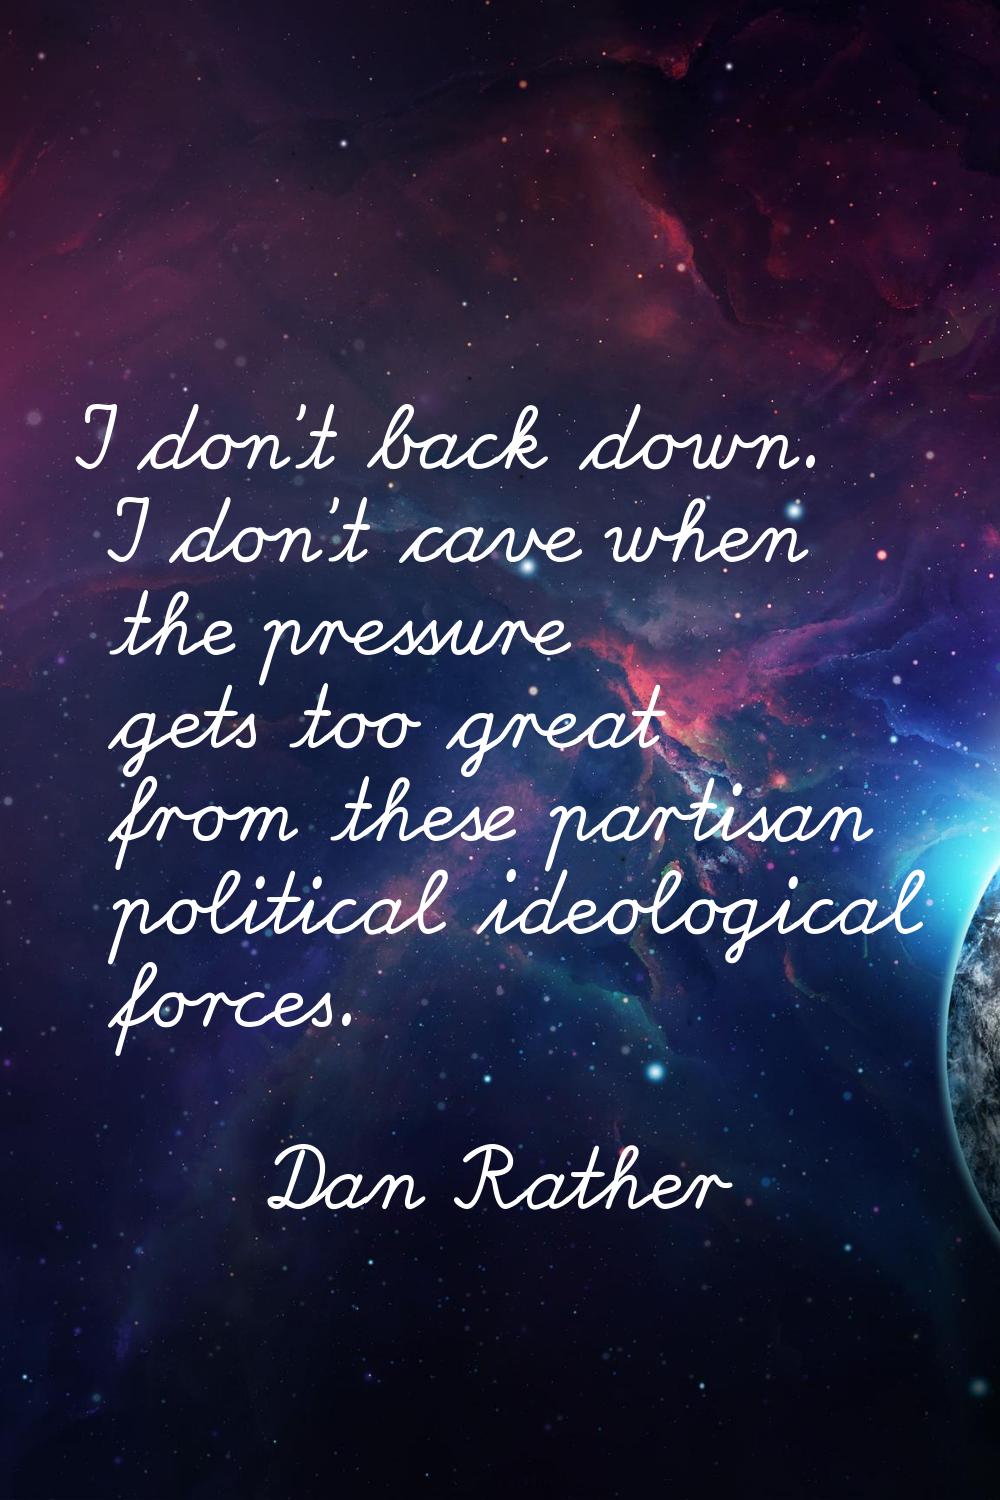 I don't back down. I don't cave when the pressure gets too great from these partisan political ideo